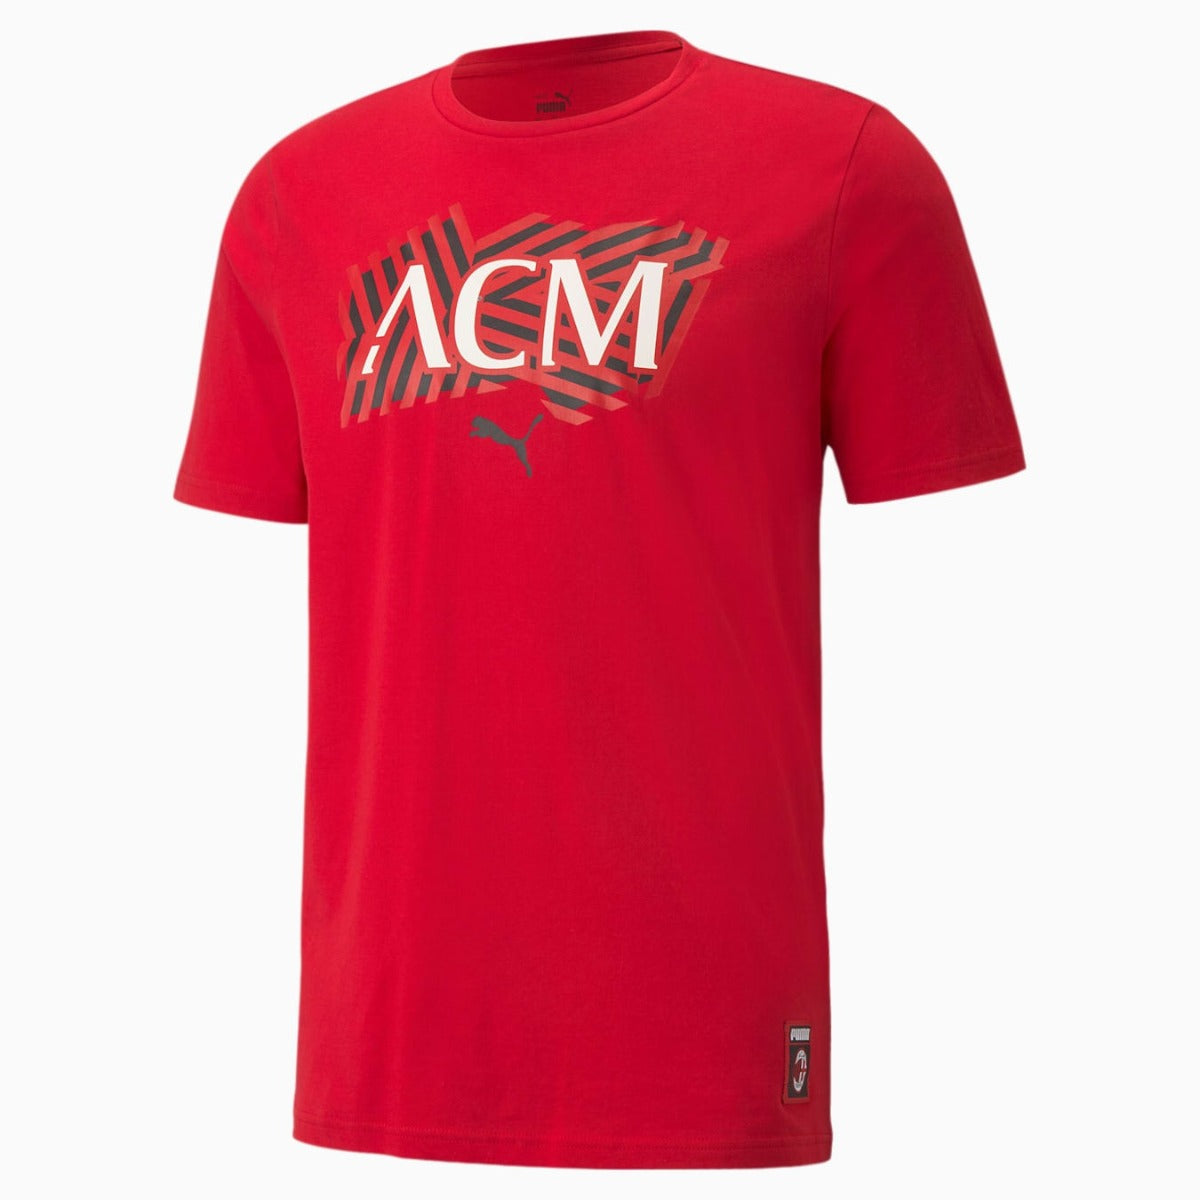 Puma 2021-22 AC Milan ftblCore Tee - Red  (Front)